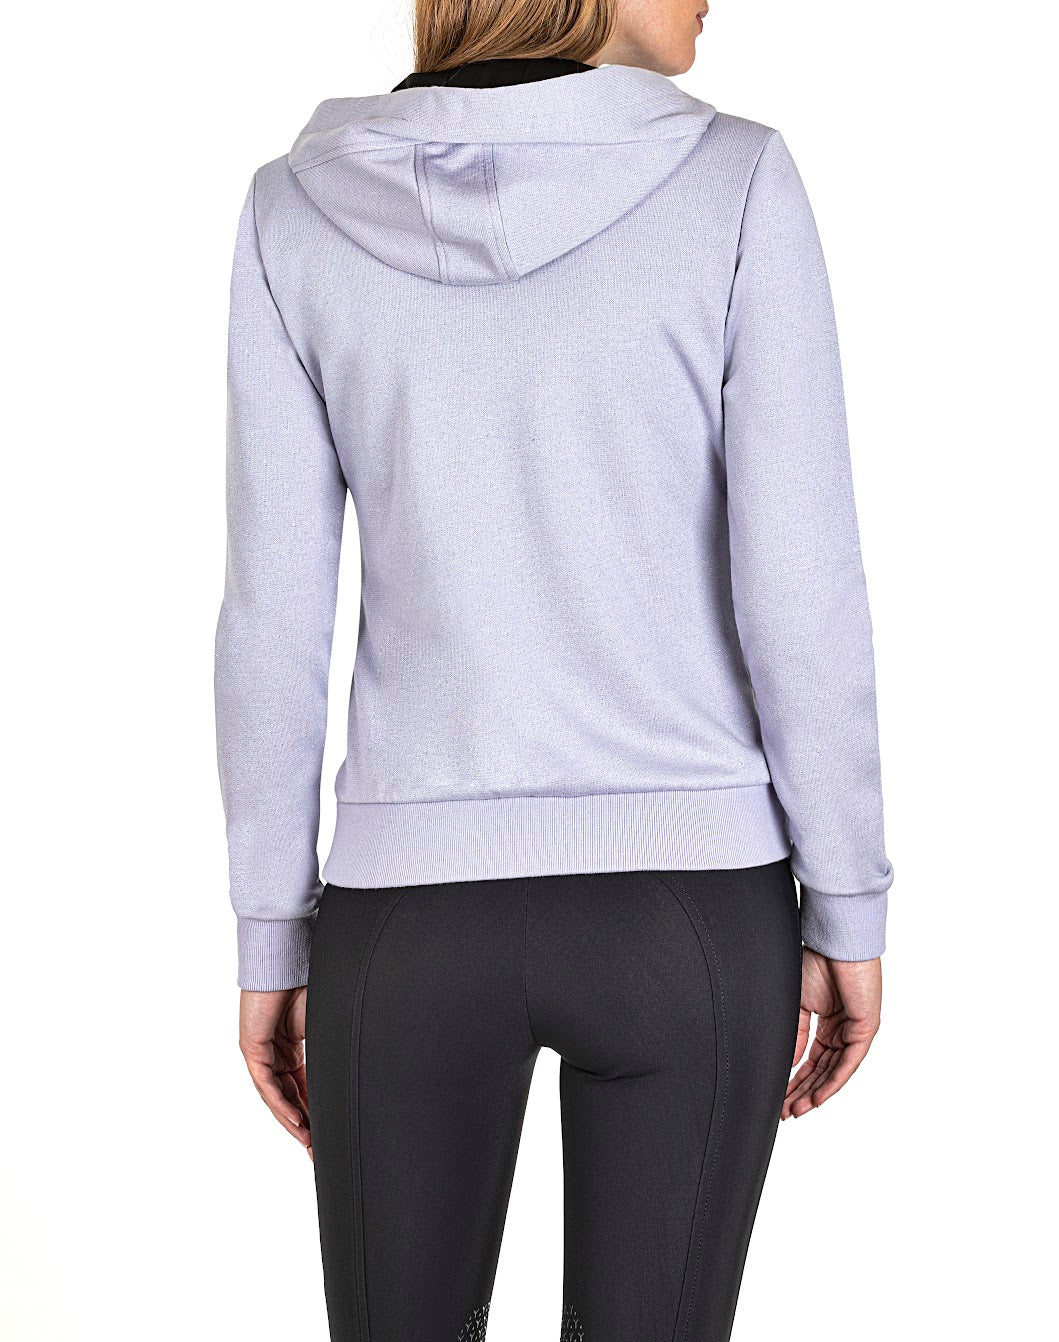 The Equiline Goreg Lilac sparkle hoody adds a subtle touch of glamour. The Hoody has a fine silver sparkle running through the fabric to give the subtle shimmer. Zip front with side insert pockets, a black tie on the hood with the Equiline logo on the sleeve finishes the look.  Made from cotton bi stretch jersey and machine washable. 